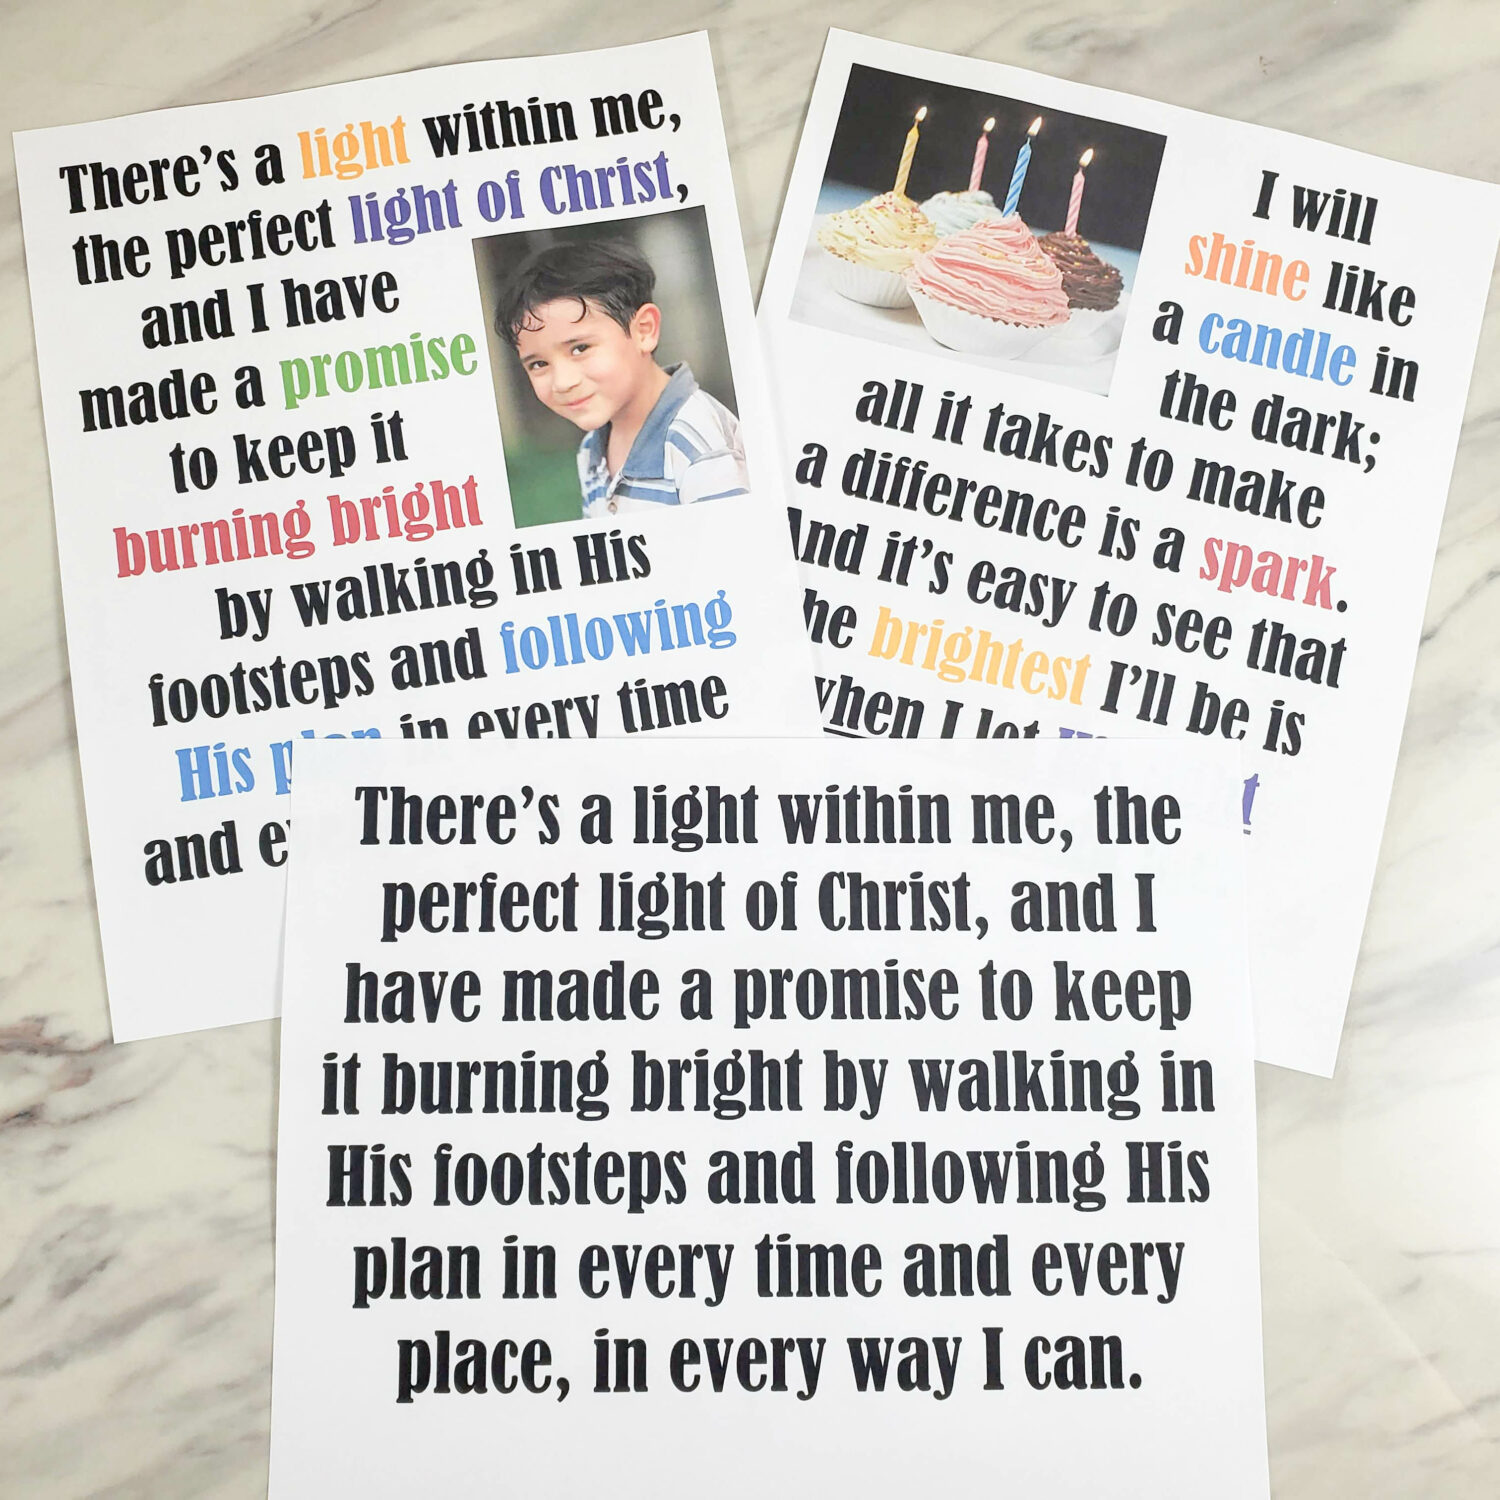 I Will Shine Flip Chart new Primary song by Shawna Edwards lyrics and flipcharts in 3 different styles including colorful, black and white lyrics only, and slideshow options!